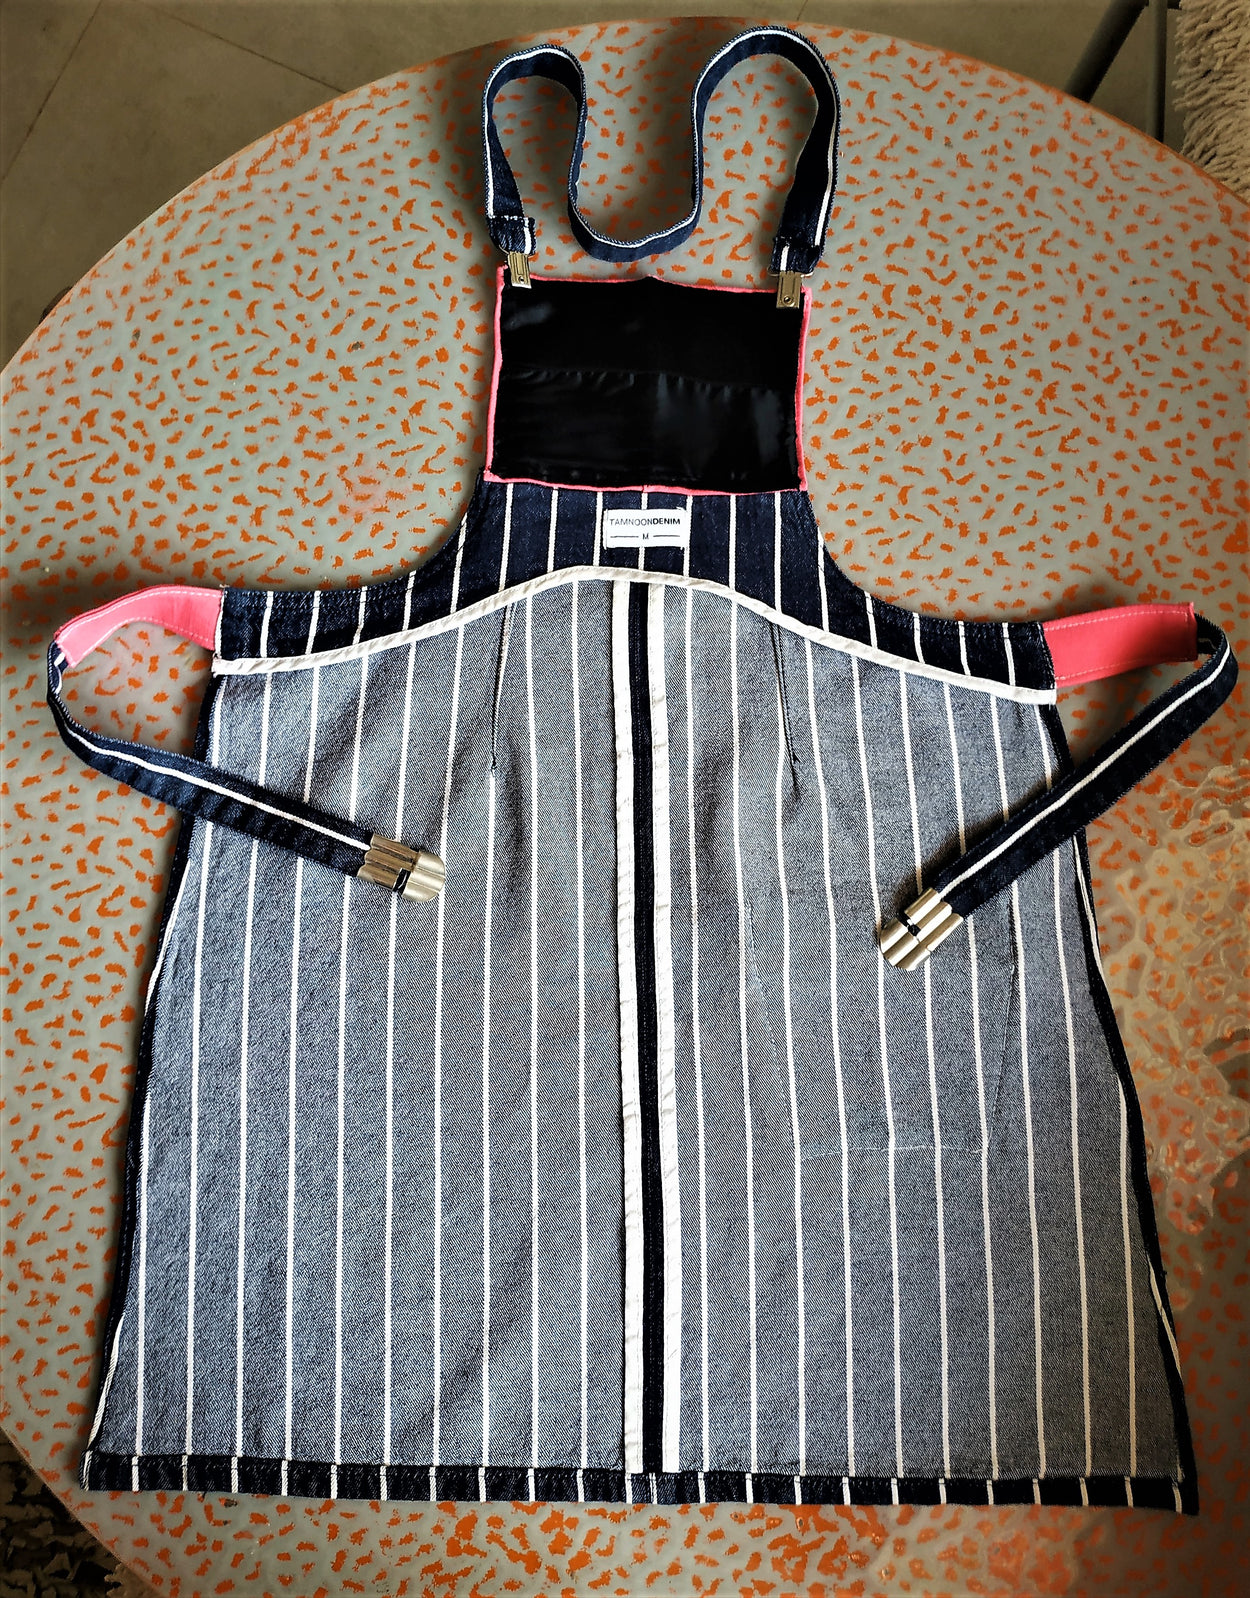  A set of denim aprons for HER and HIM.